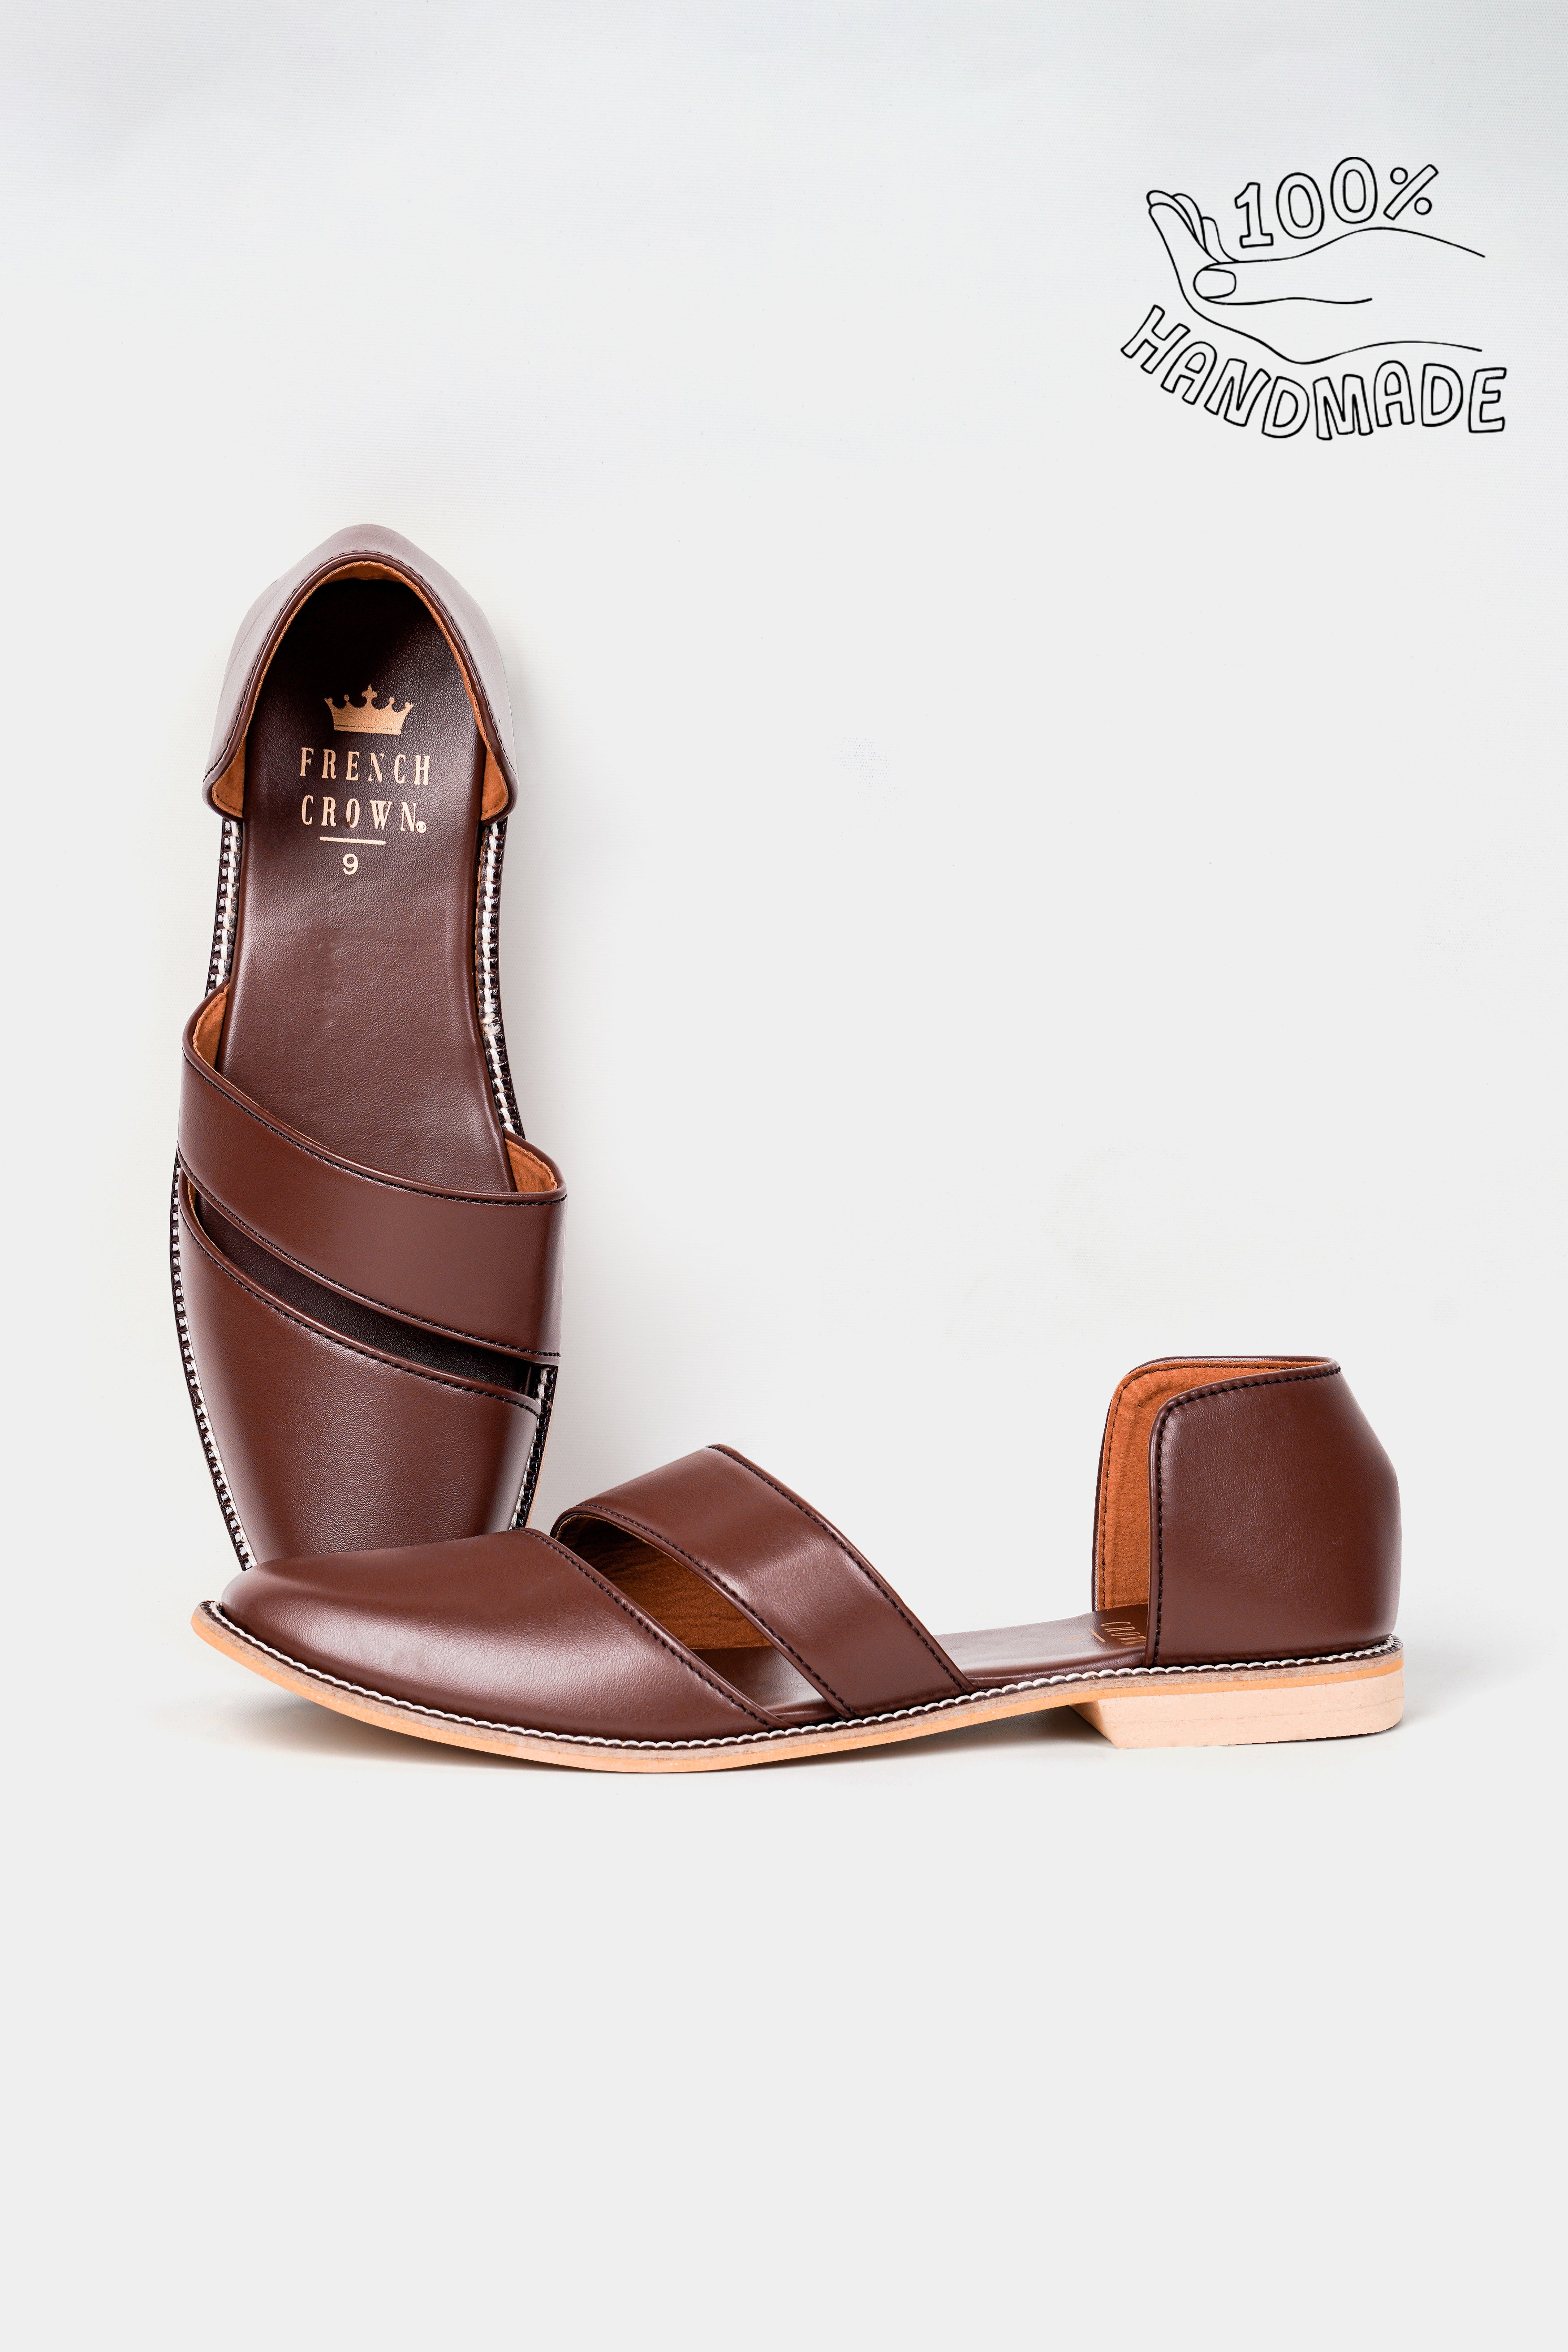 Brown Vegan Leather Hand Stitched Pathanis Sandal FT138-6, FT138-7, FT138-8, FT138-9, FT138-10, FT138-11